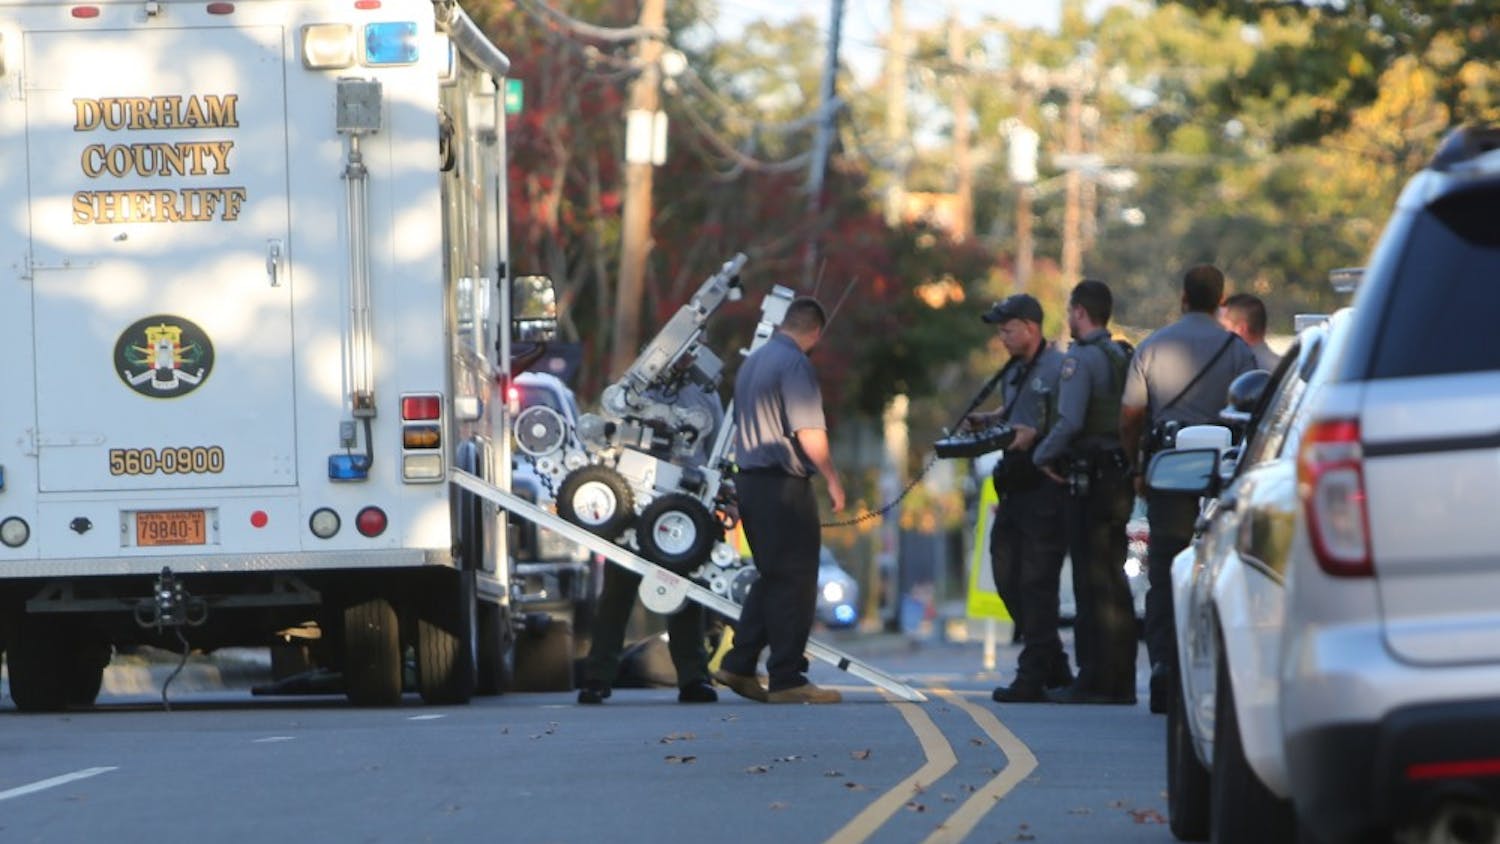 Durham County Bomb Squad deploys a bomb robot on Weaver St. in Carrboro in connection to the explosion at McCorkle Place on Thursday afternoon.  